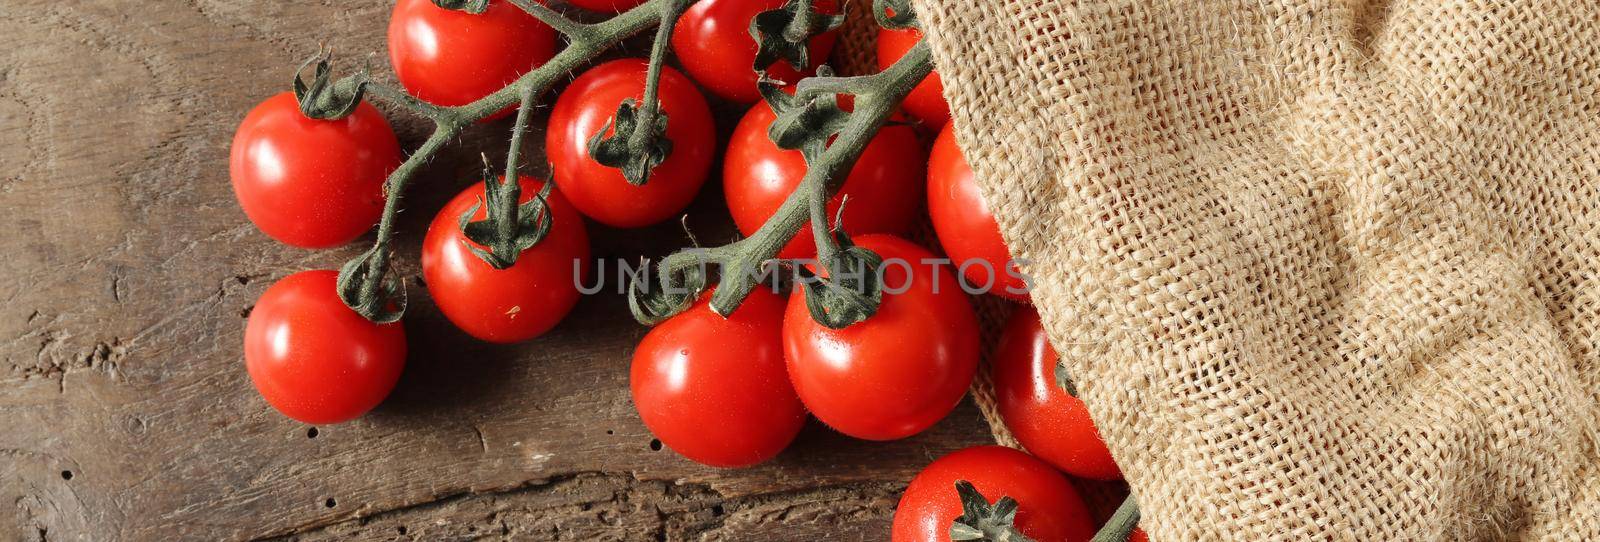 Rustic background with tomatoes by NelliPolk